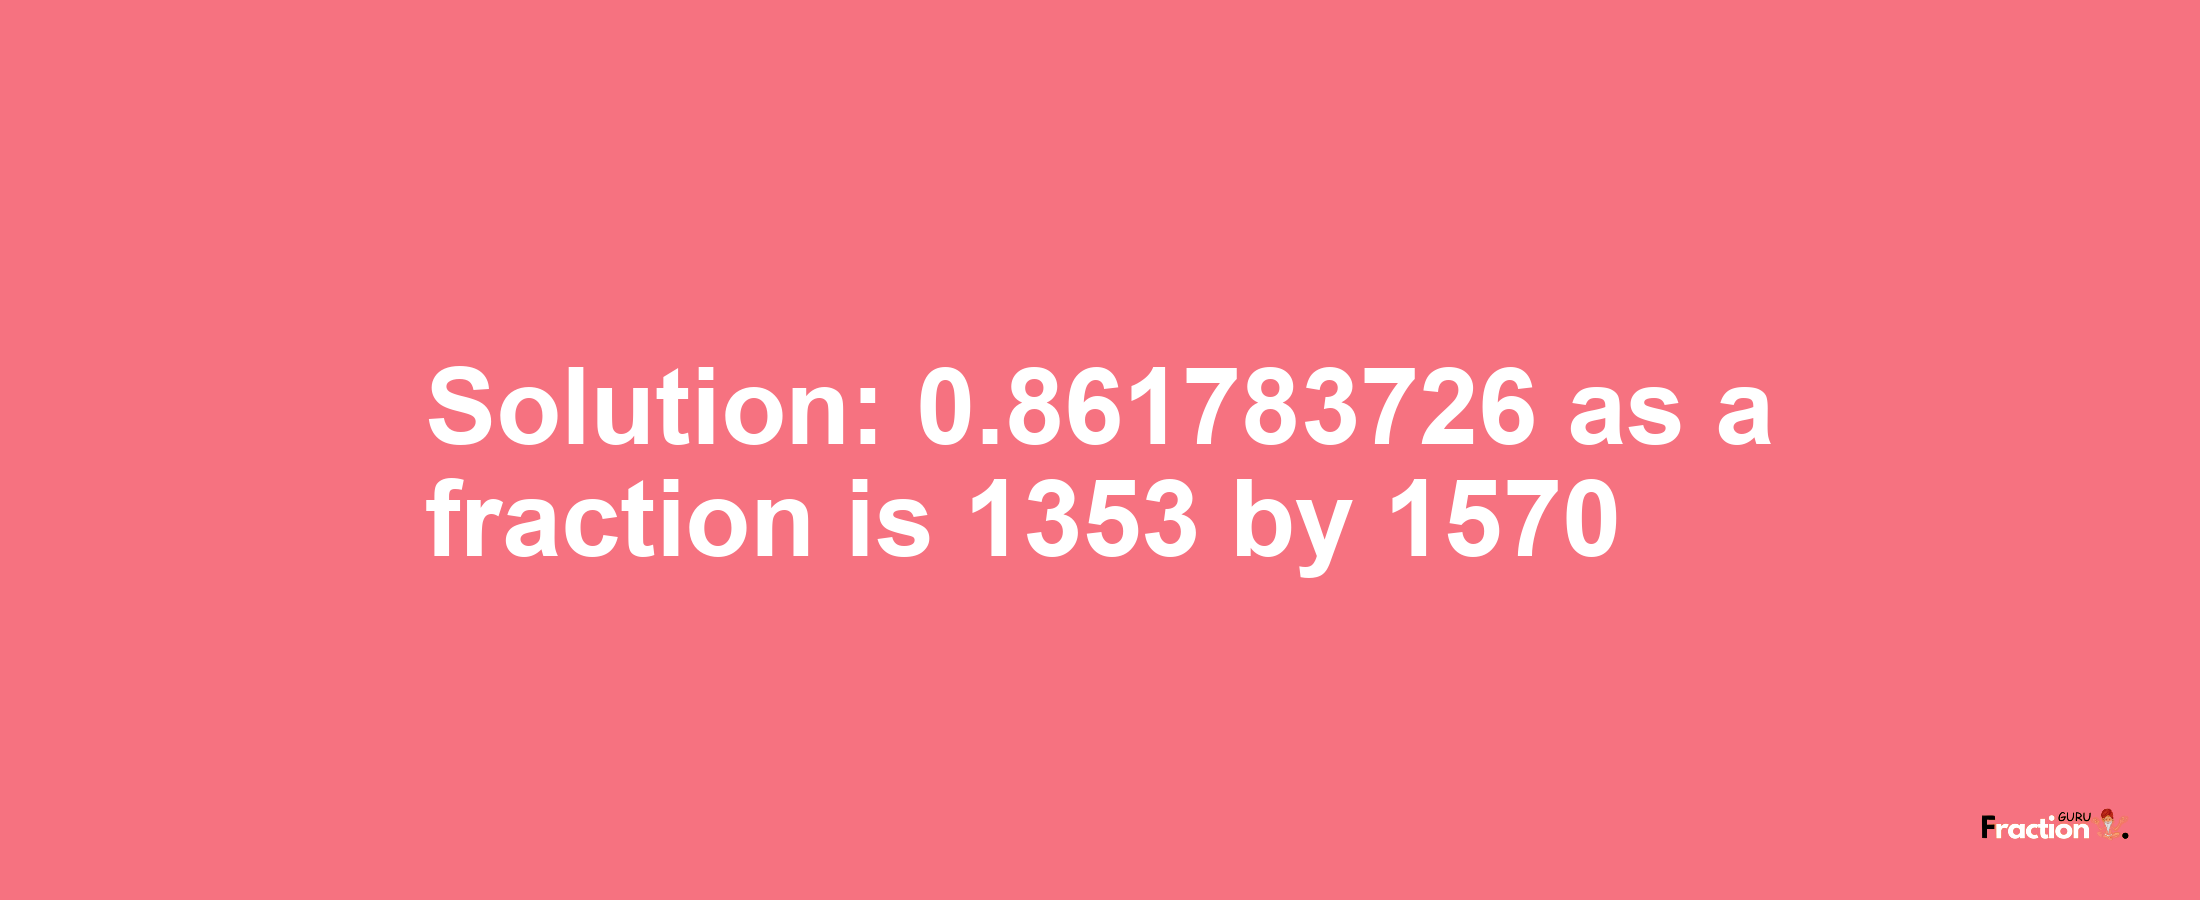 Solution:0.861783726 as a fraction is 1353/1570